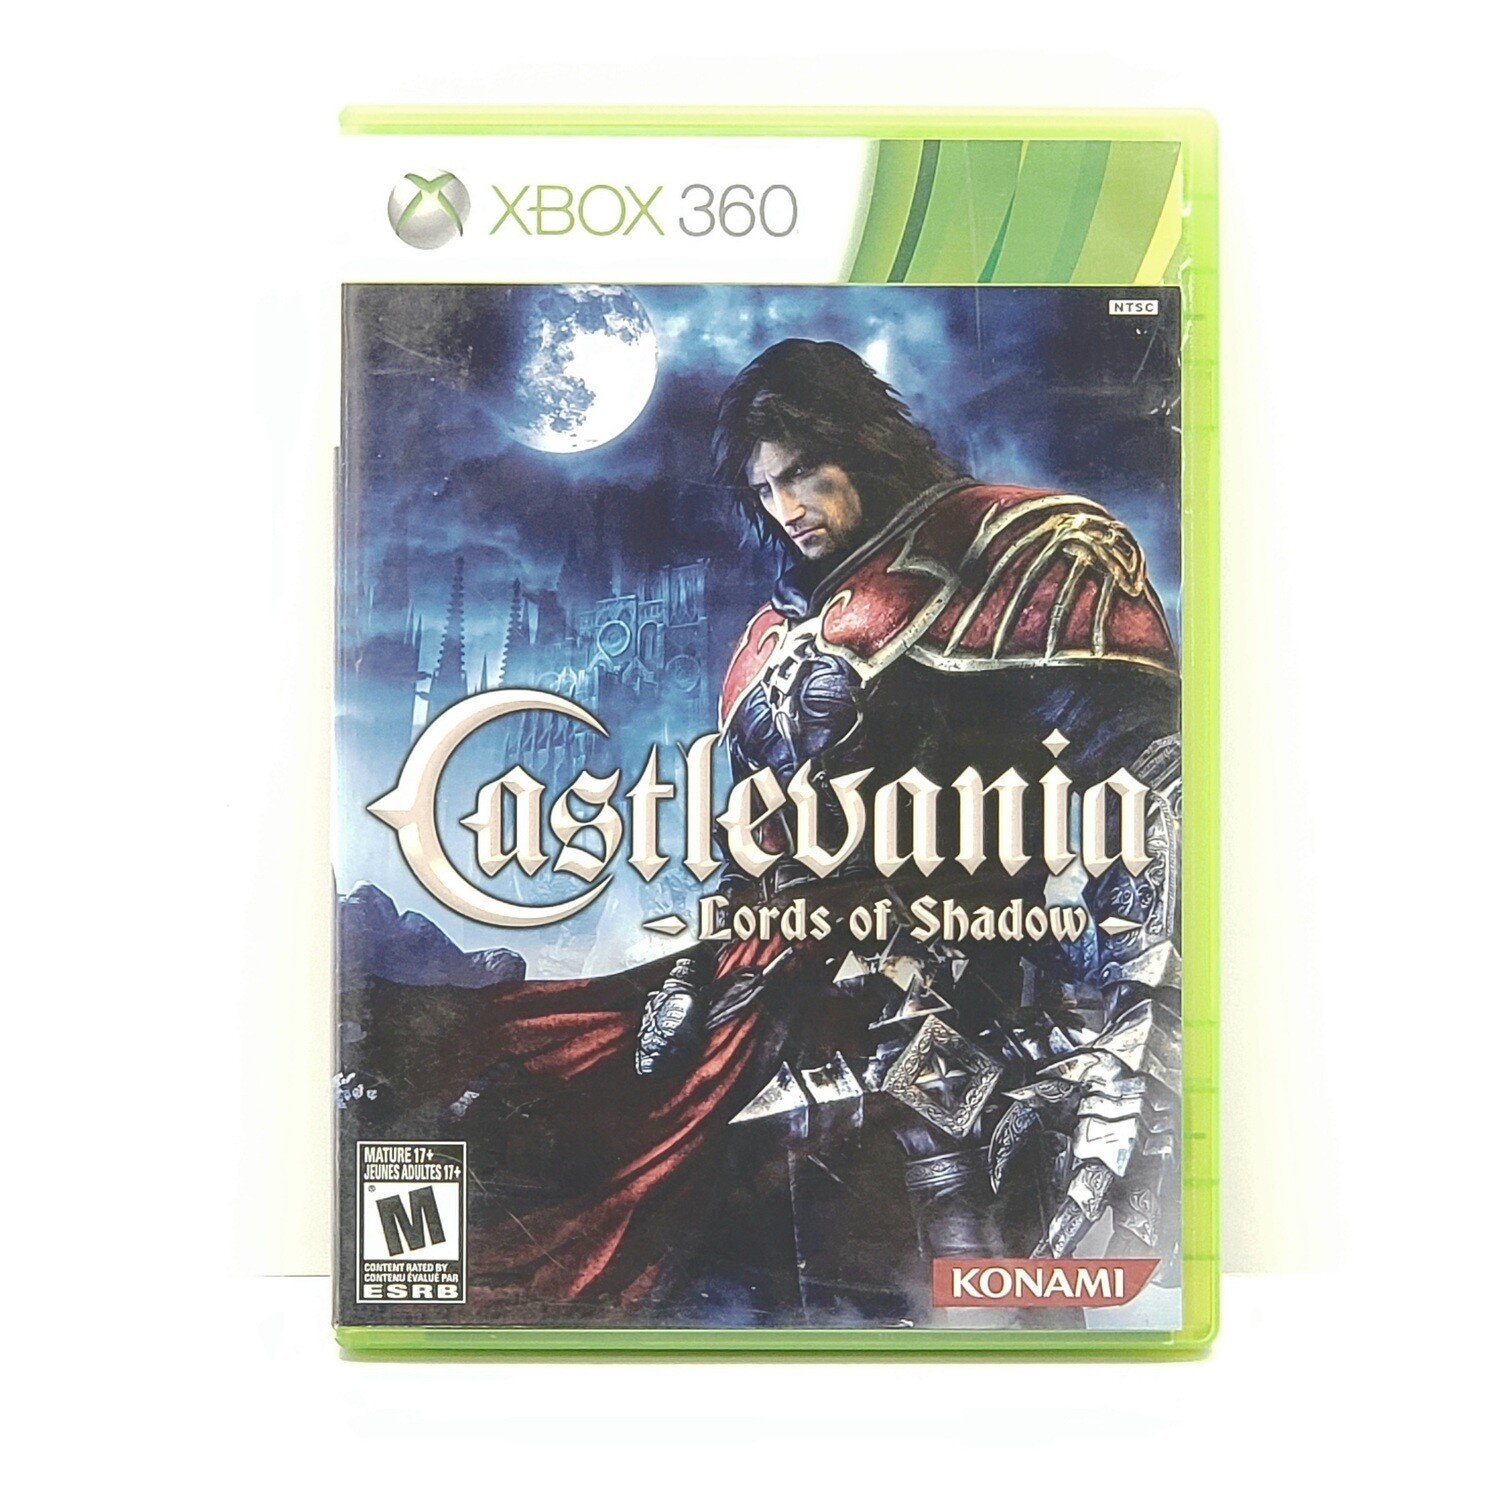 Castlevania: Lords of Shadow Video Game for Xbox 360 - Used